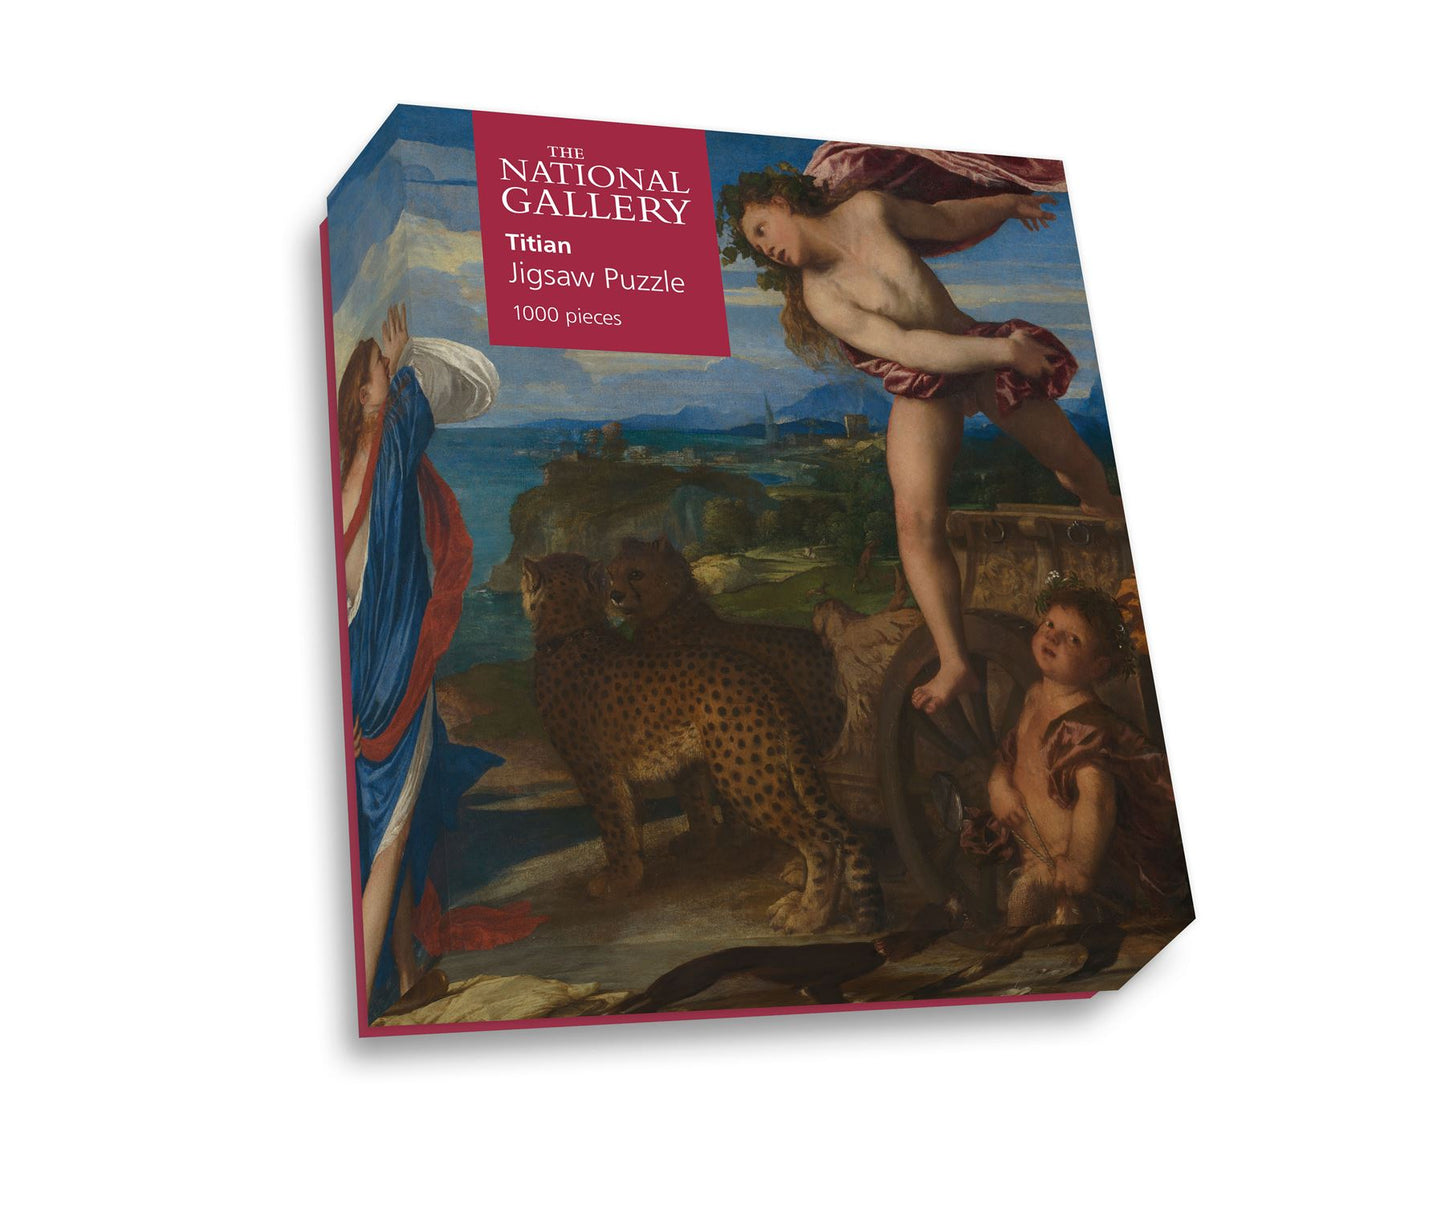 Bacchus and Ariadne - National Gallery 1000 Piece Jigsaw Puzzle